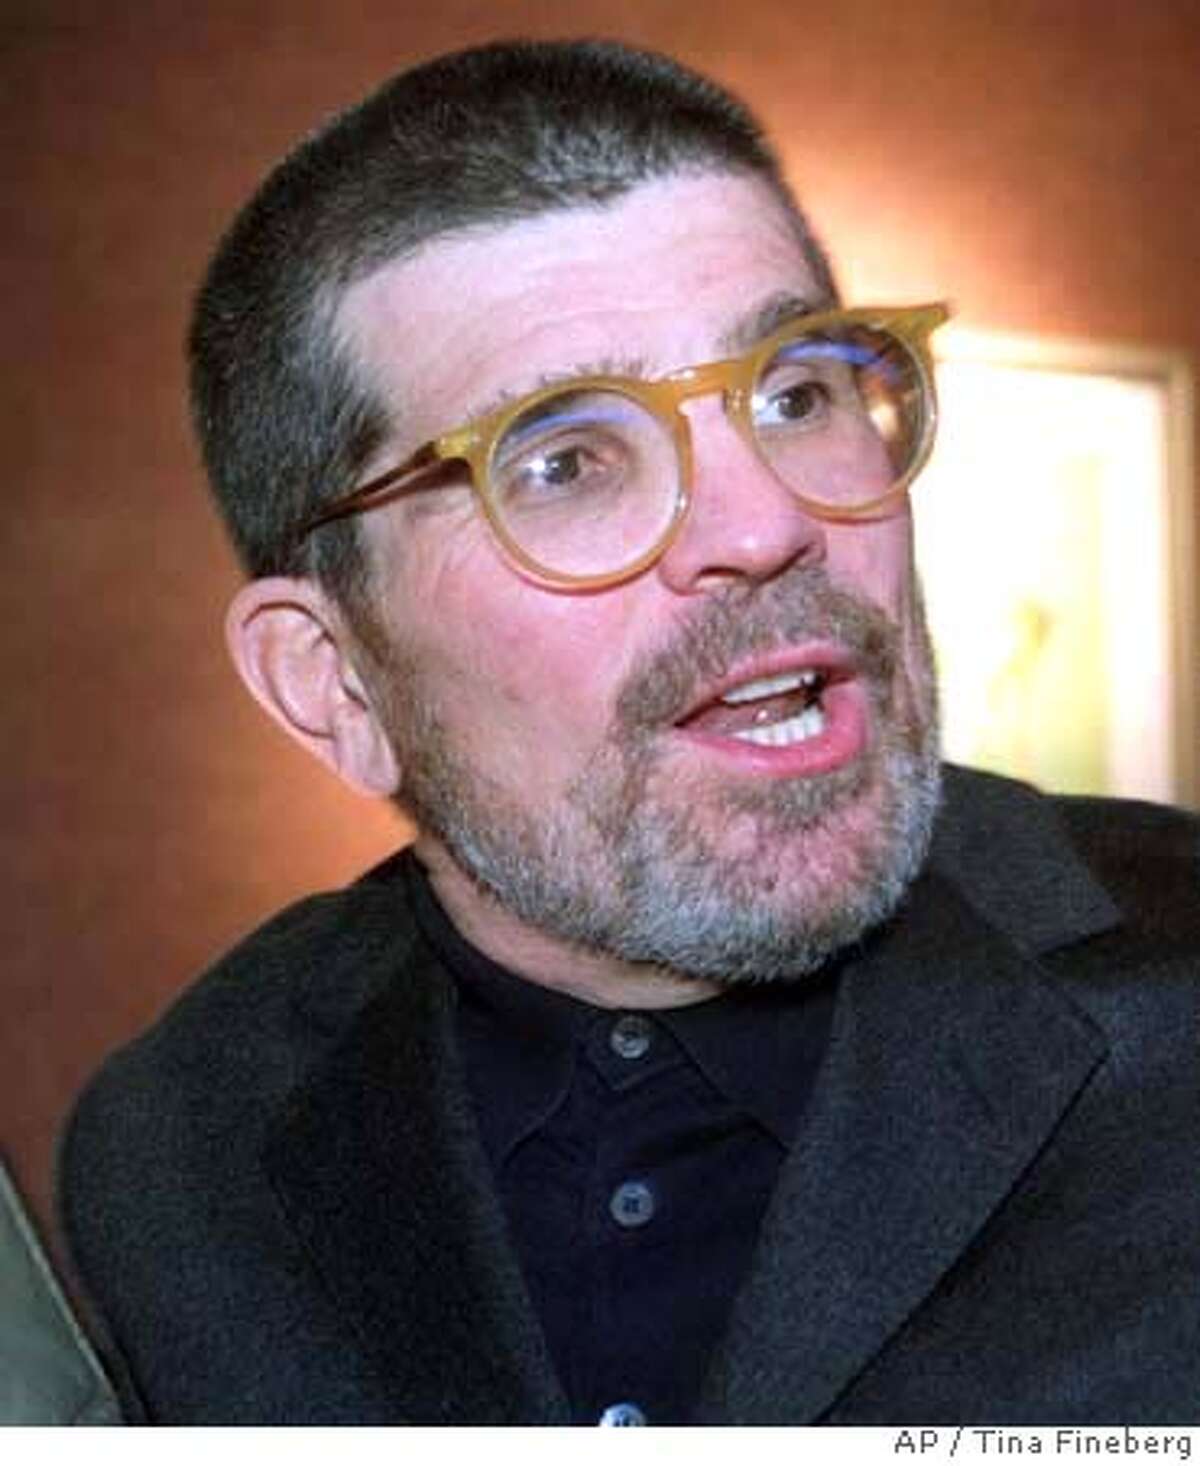 MAMET.jpg David Mamet arrives at the opening of the movie "State and Main," on Monday, Dec. 4, 2000, in New York. Mamet's movie tells the story of a Vermont town turned upside-down by a movie crew that shoots in the small town for seven days. (AP Photo/Tina Fineberg) ALSO Ran on: 02-25-2007 David Mamet CAT